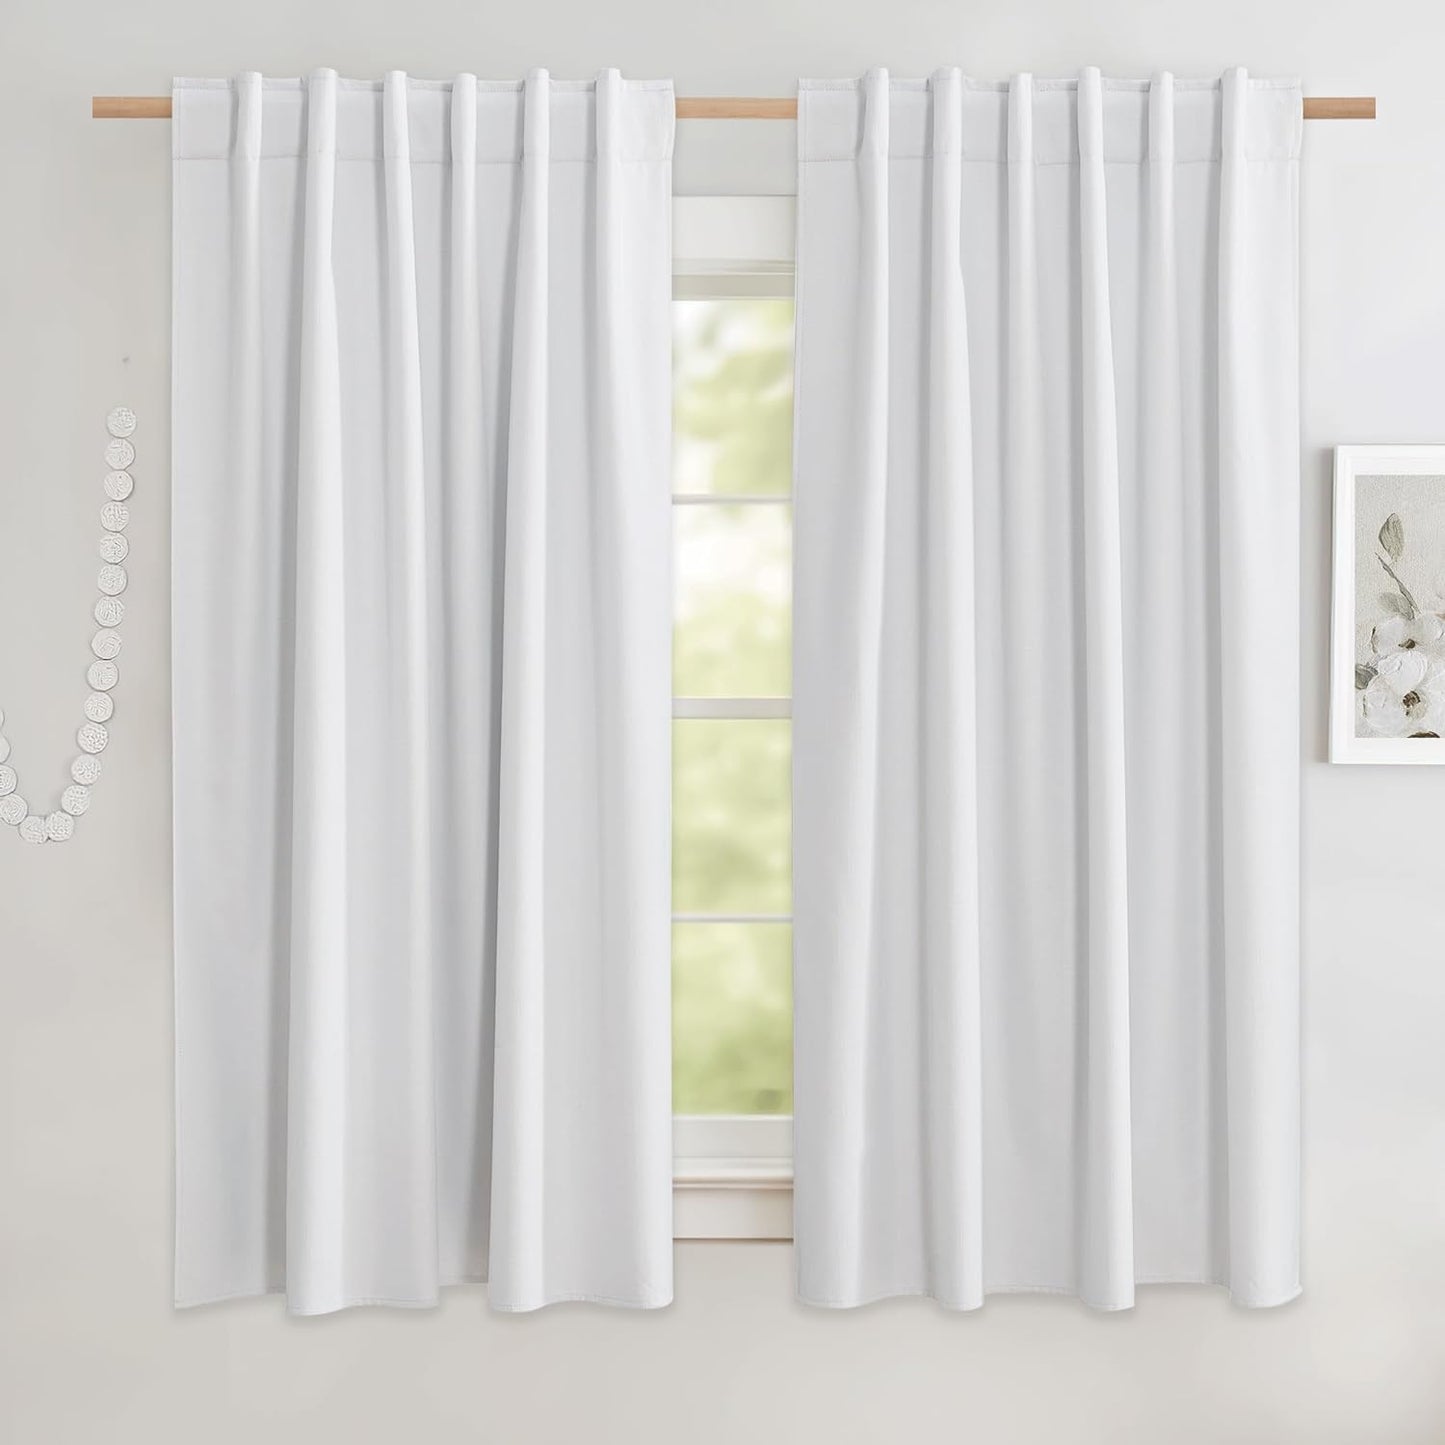 NICETOWN 100% Blackout Linen Curtains for Living Room with Thermal Insulated White Liner, Ivory, 52" Wide, 2 Panels, 84" Long Drapes, Back Tab Retro Linen Curtains Vertical Drapes Privacy for Bedroom  NICETOWN White W52 X L63 